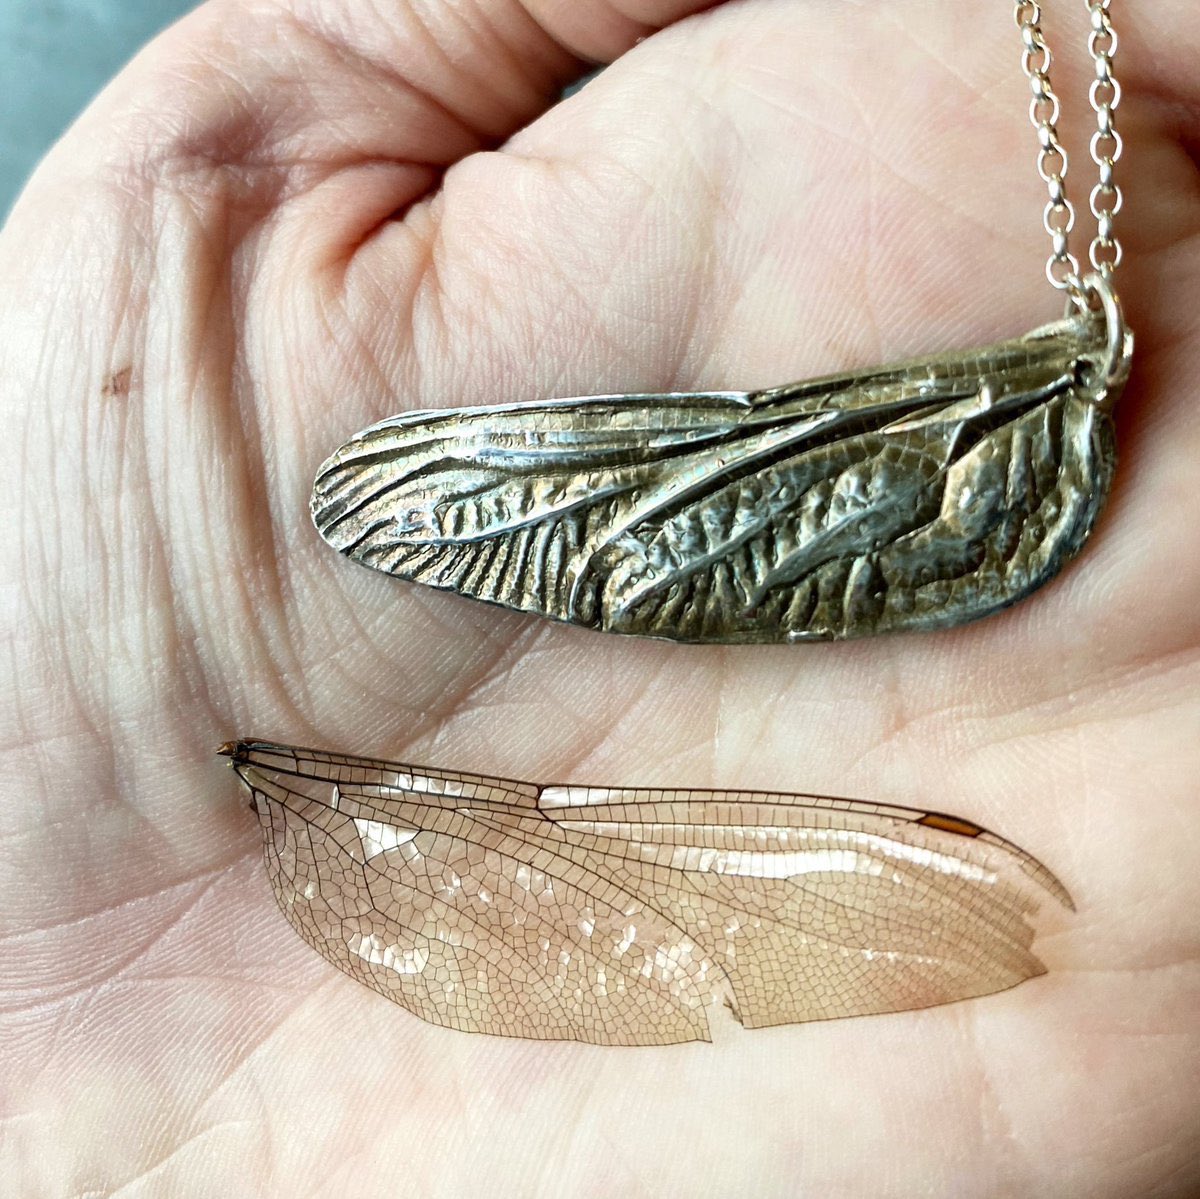 Till 2016 I made jewellery. This fitted round my depression. Then the recipient of a commission told me my work was dreadful & I haven’t made to order since. I make silver casts of flowers & nature finds. Her words have stopped me reopening my Etsy shop. Not sure what to do.